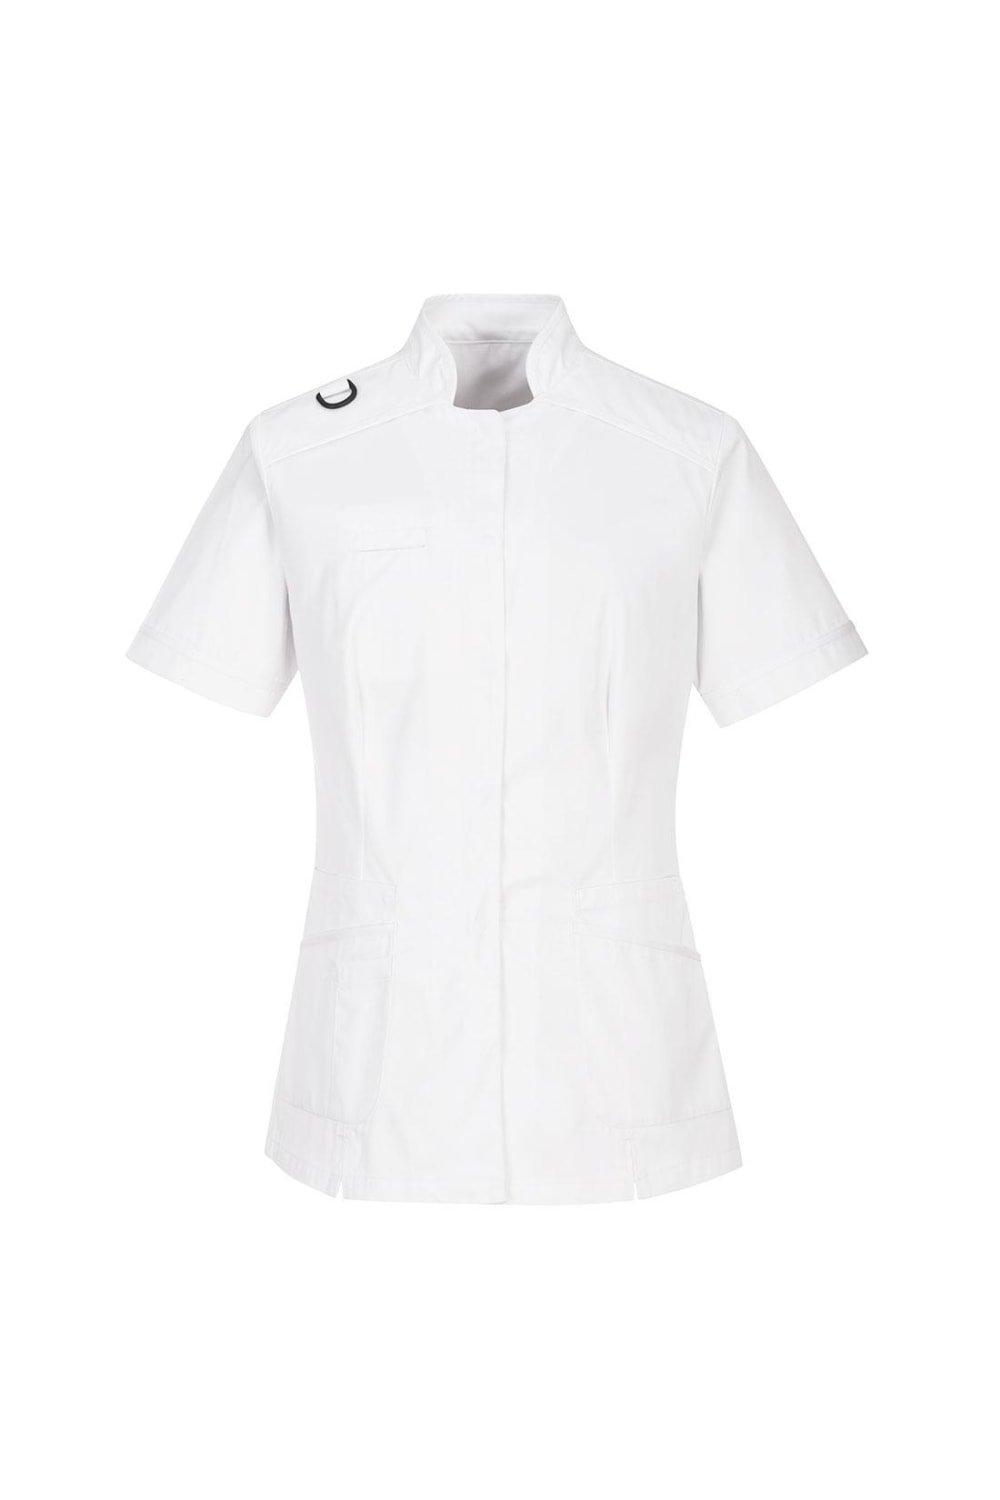 Contrast Medical Tunic